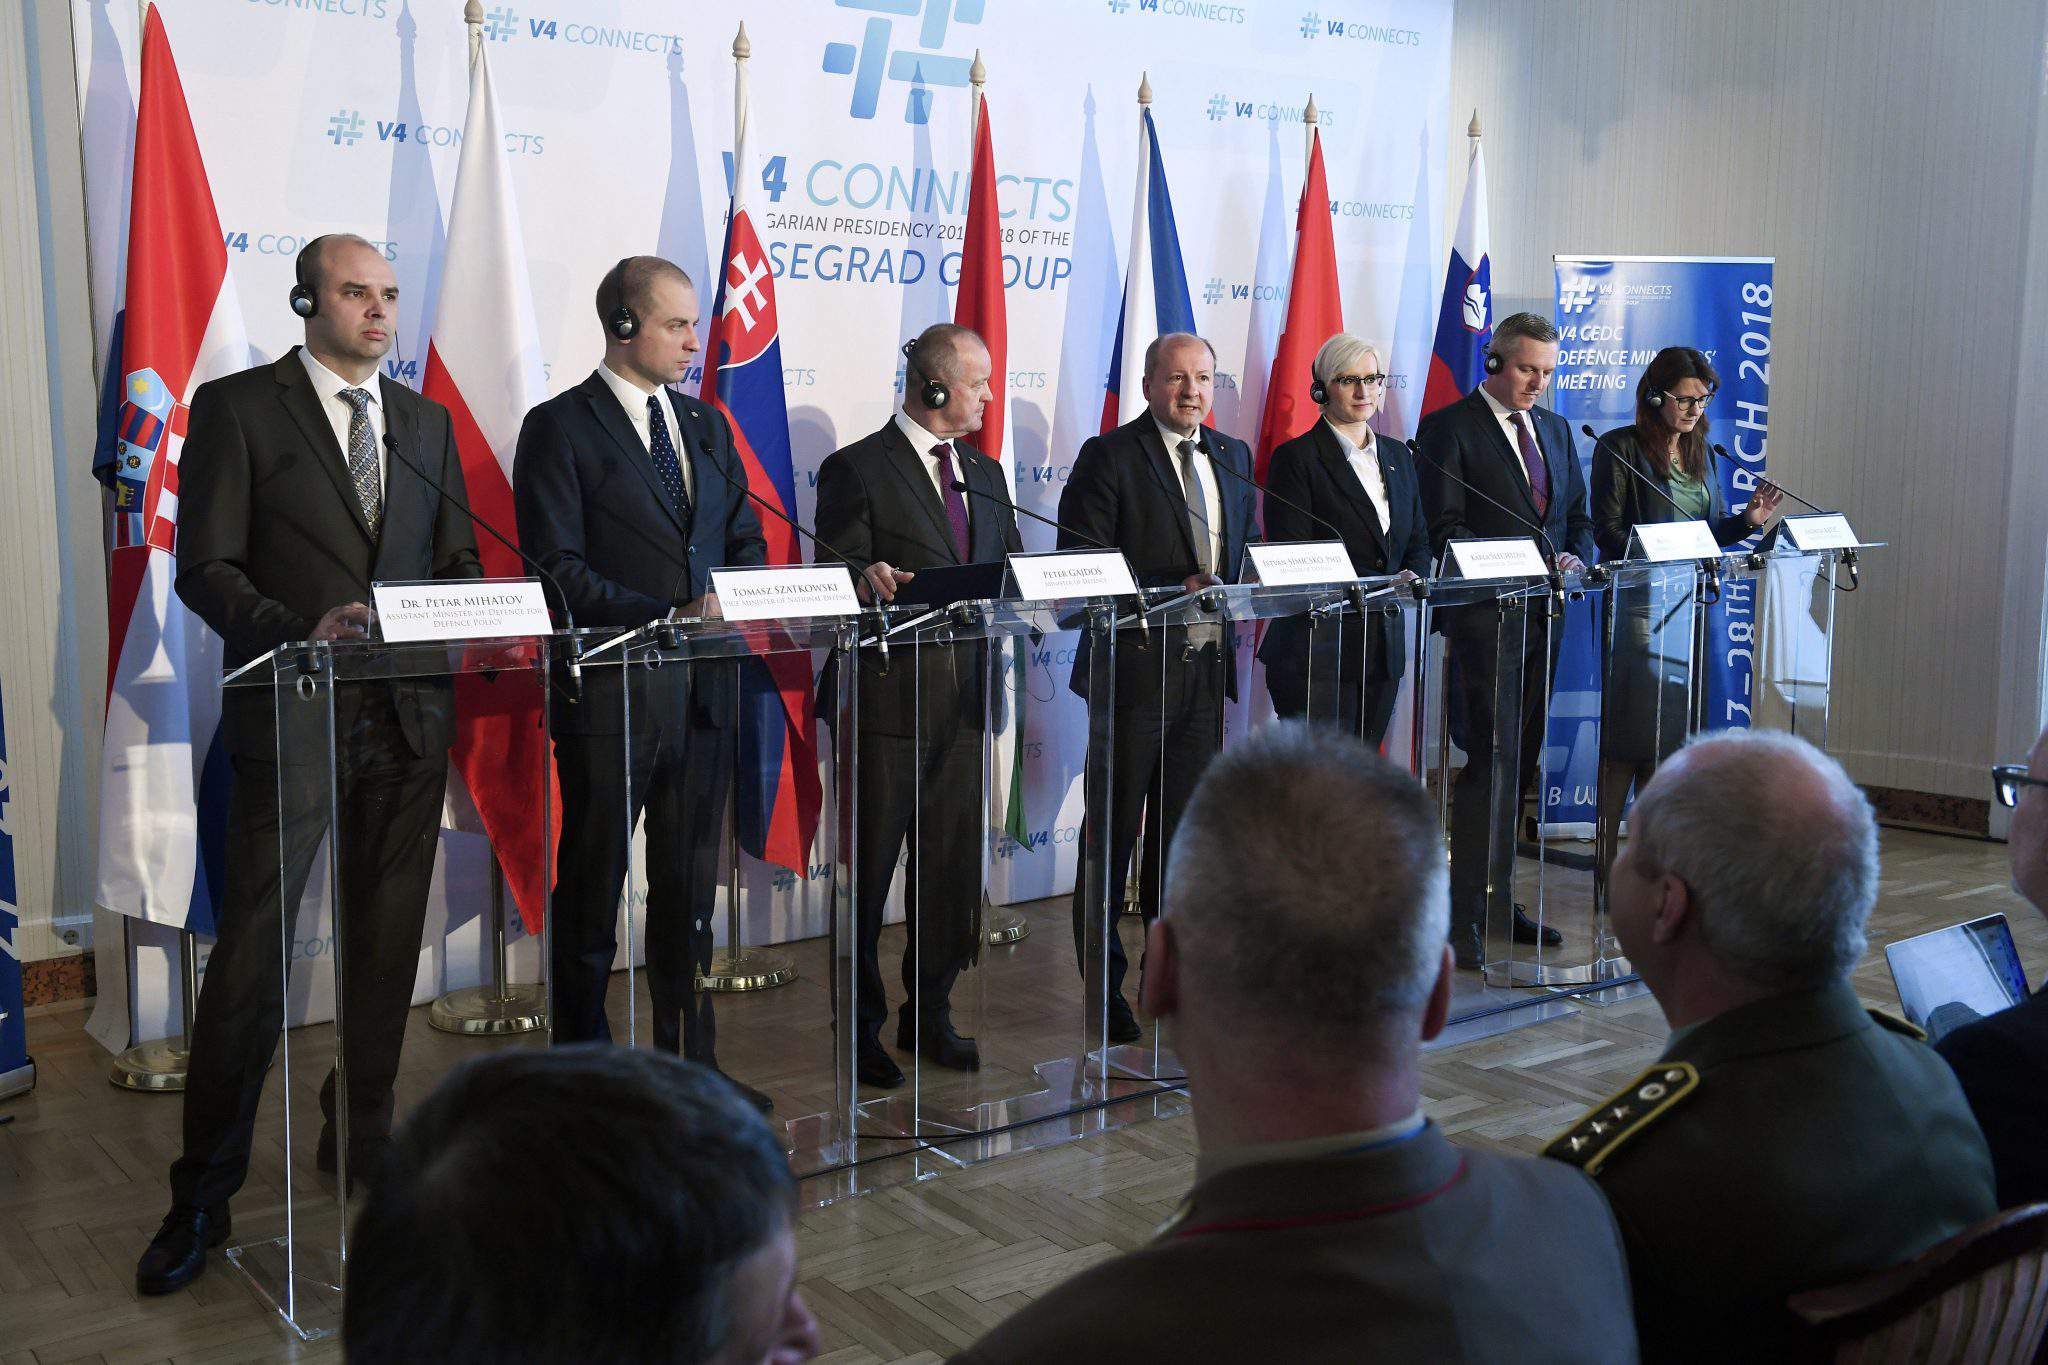 The security of the central European region is a guarantee of Europe's future, Defence Minister István Simicskó told a press conference after a meeting of central European Defence Cooperation (CEDC) defence ministers in Budapest on Wednesday.